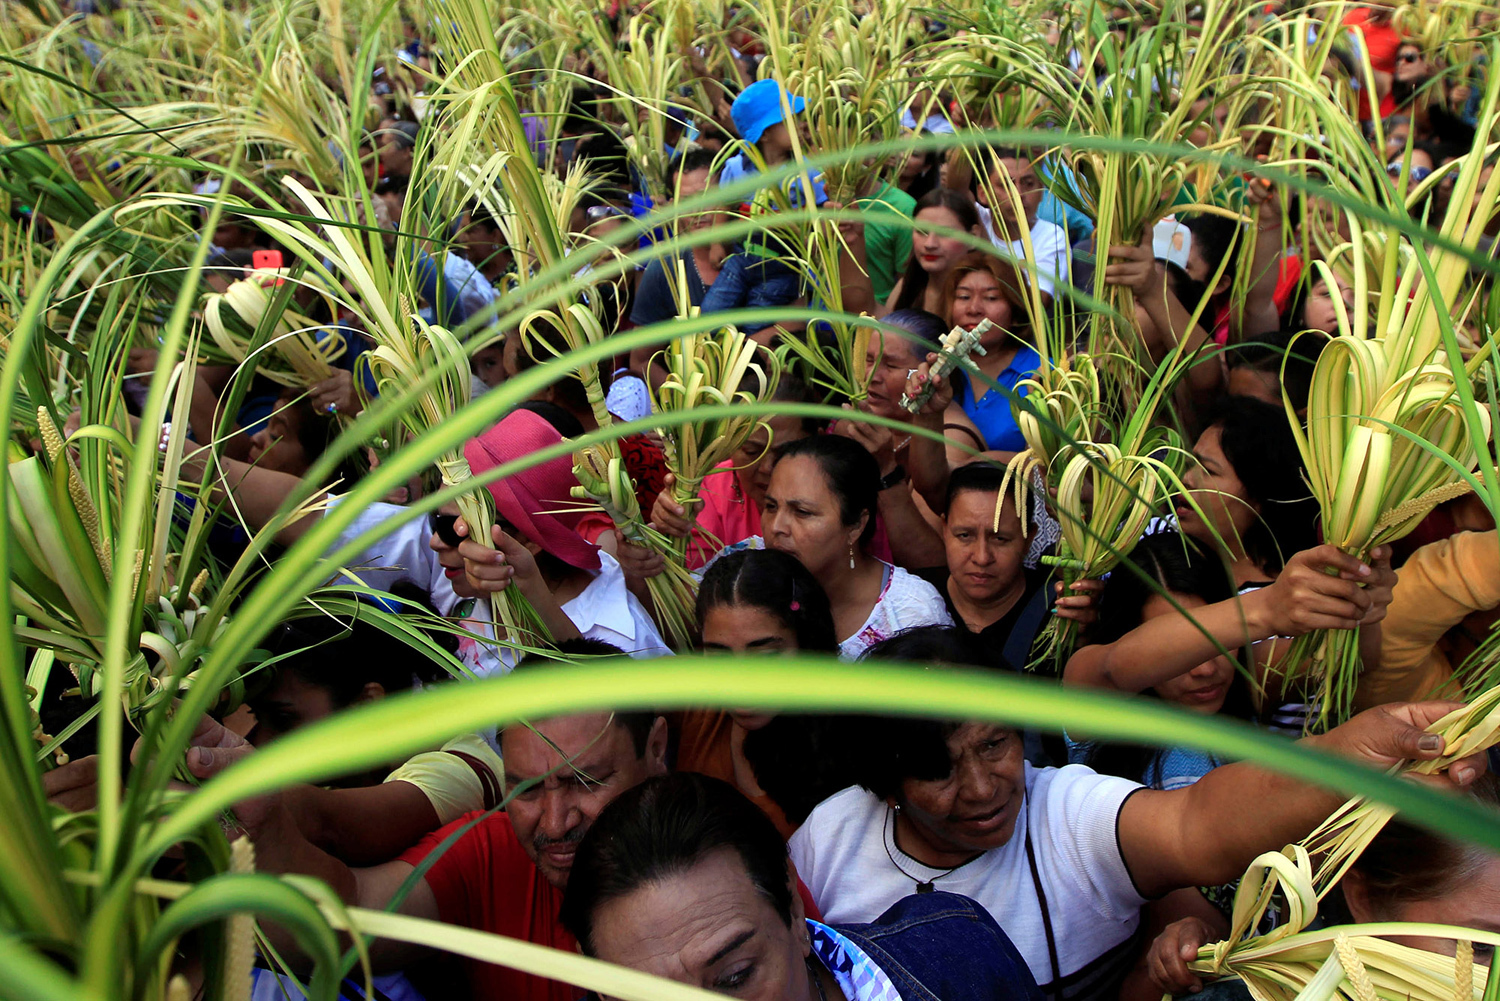 Catholics take part in a procession during a Palm Sunday celebration in Tegucigalpa, Honduras. PHOTO: REUTERS 